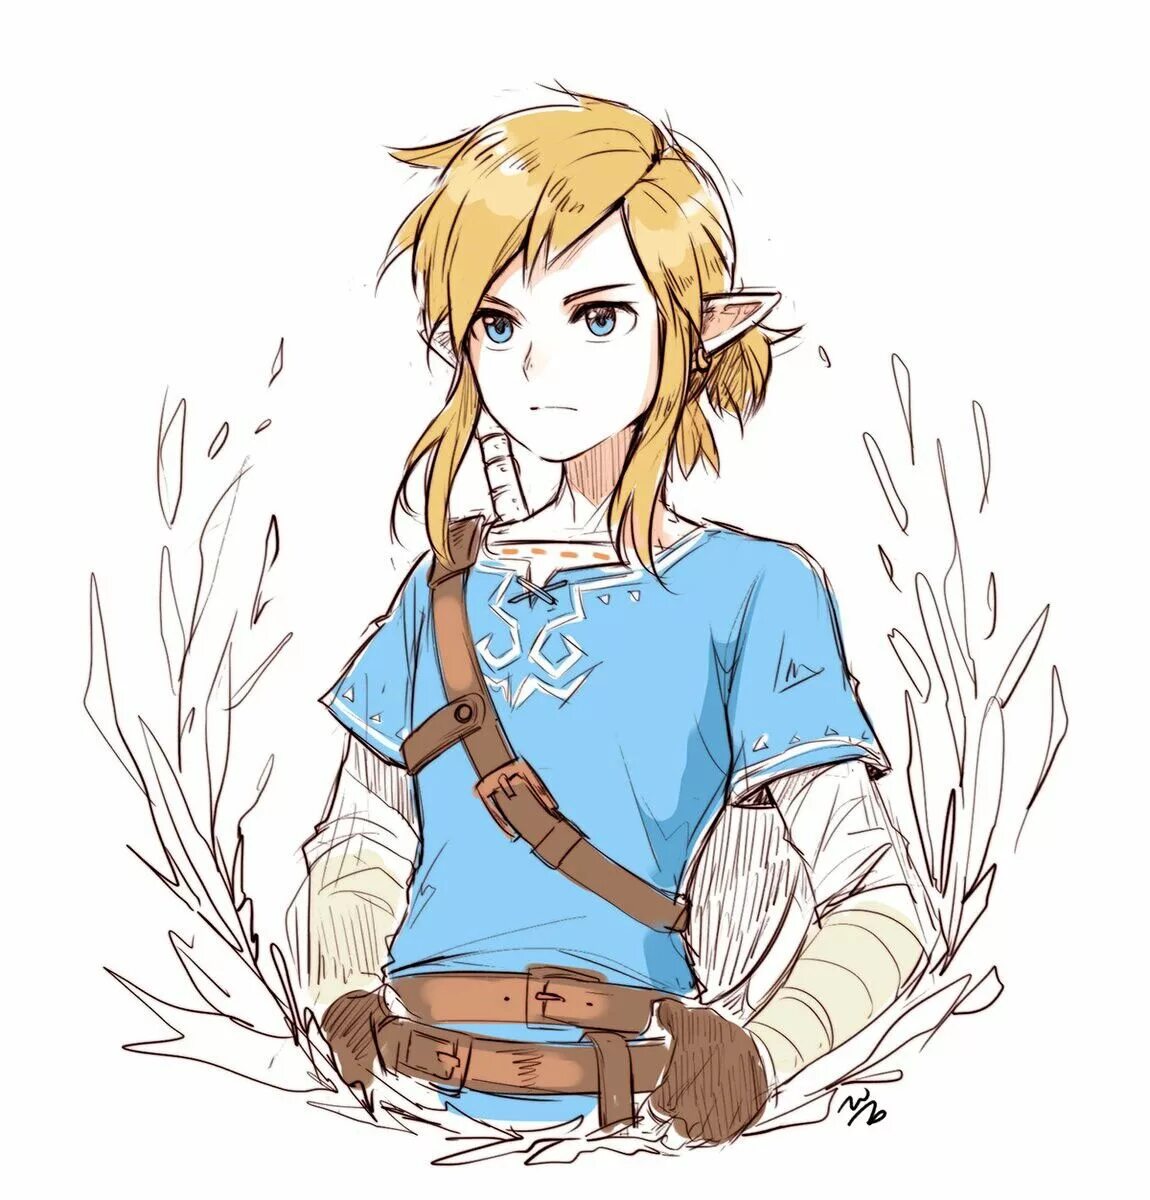 Learned link link. Линк Breath of the Wild. Линк Зельда Legend of Wild. Линк Легенда о Зельде Breath of the Wild. Линк и Зельда BOTW.